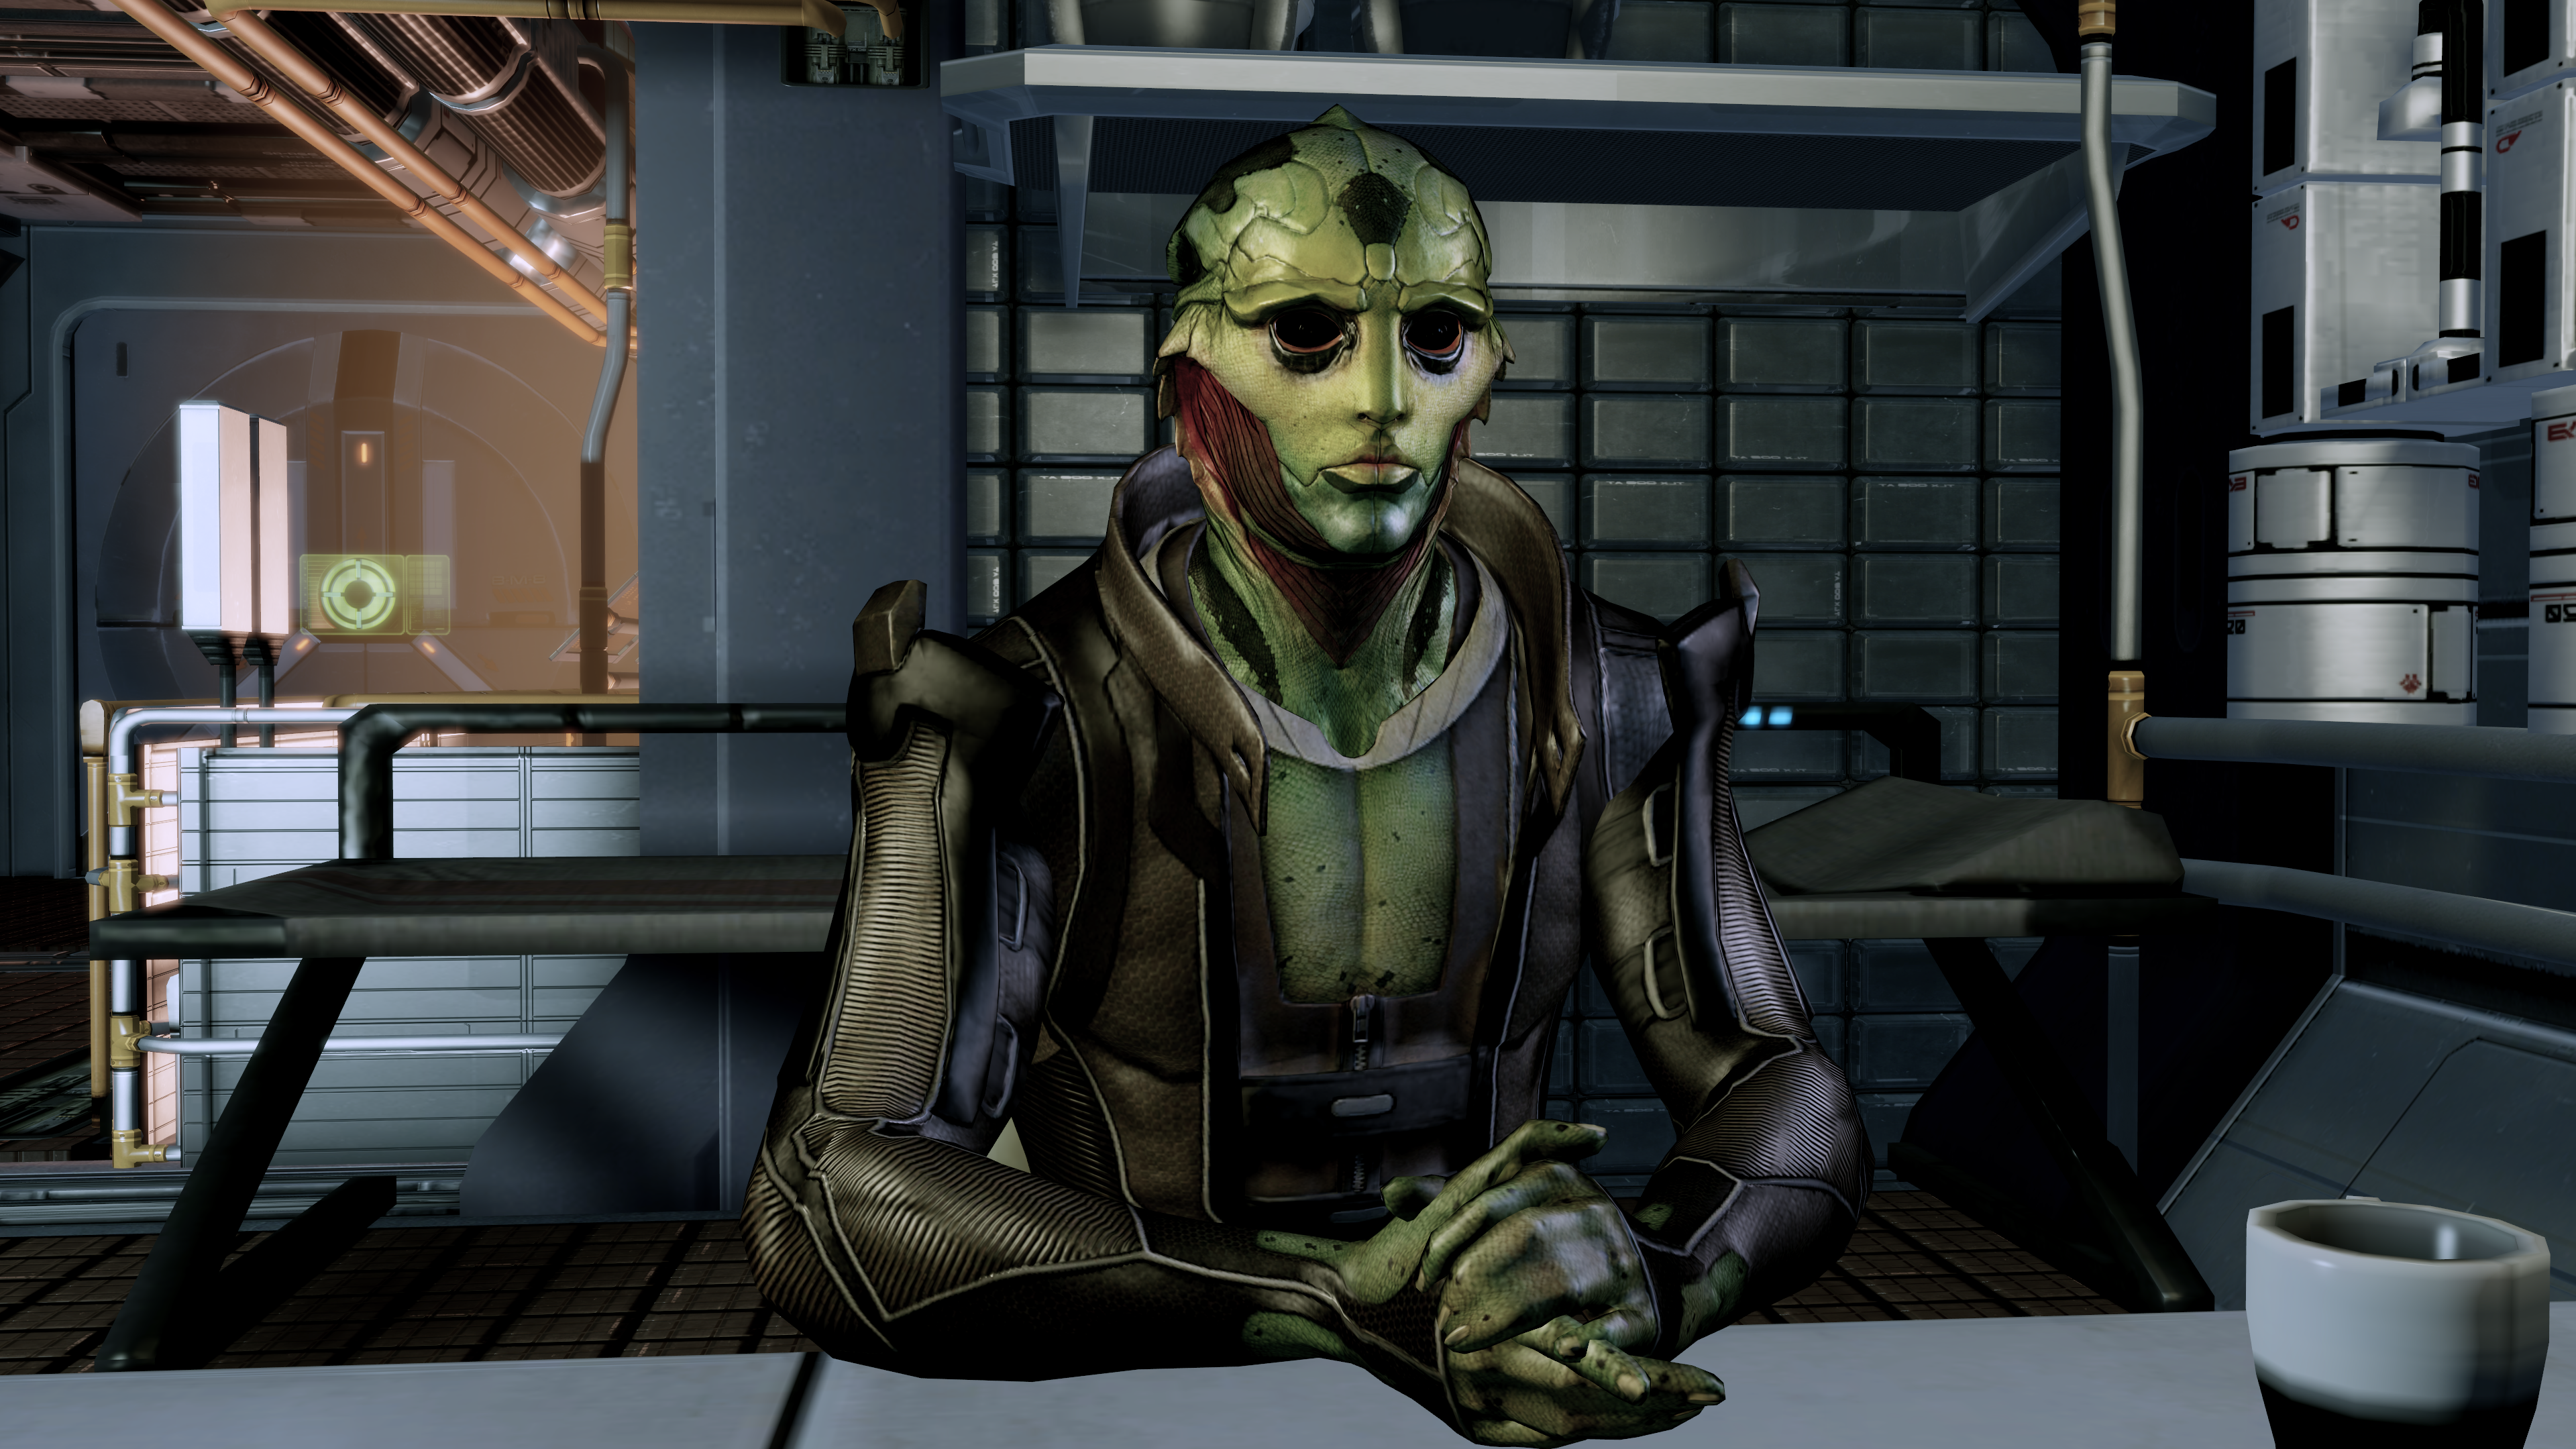 Image result for thane krios